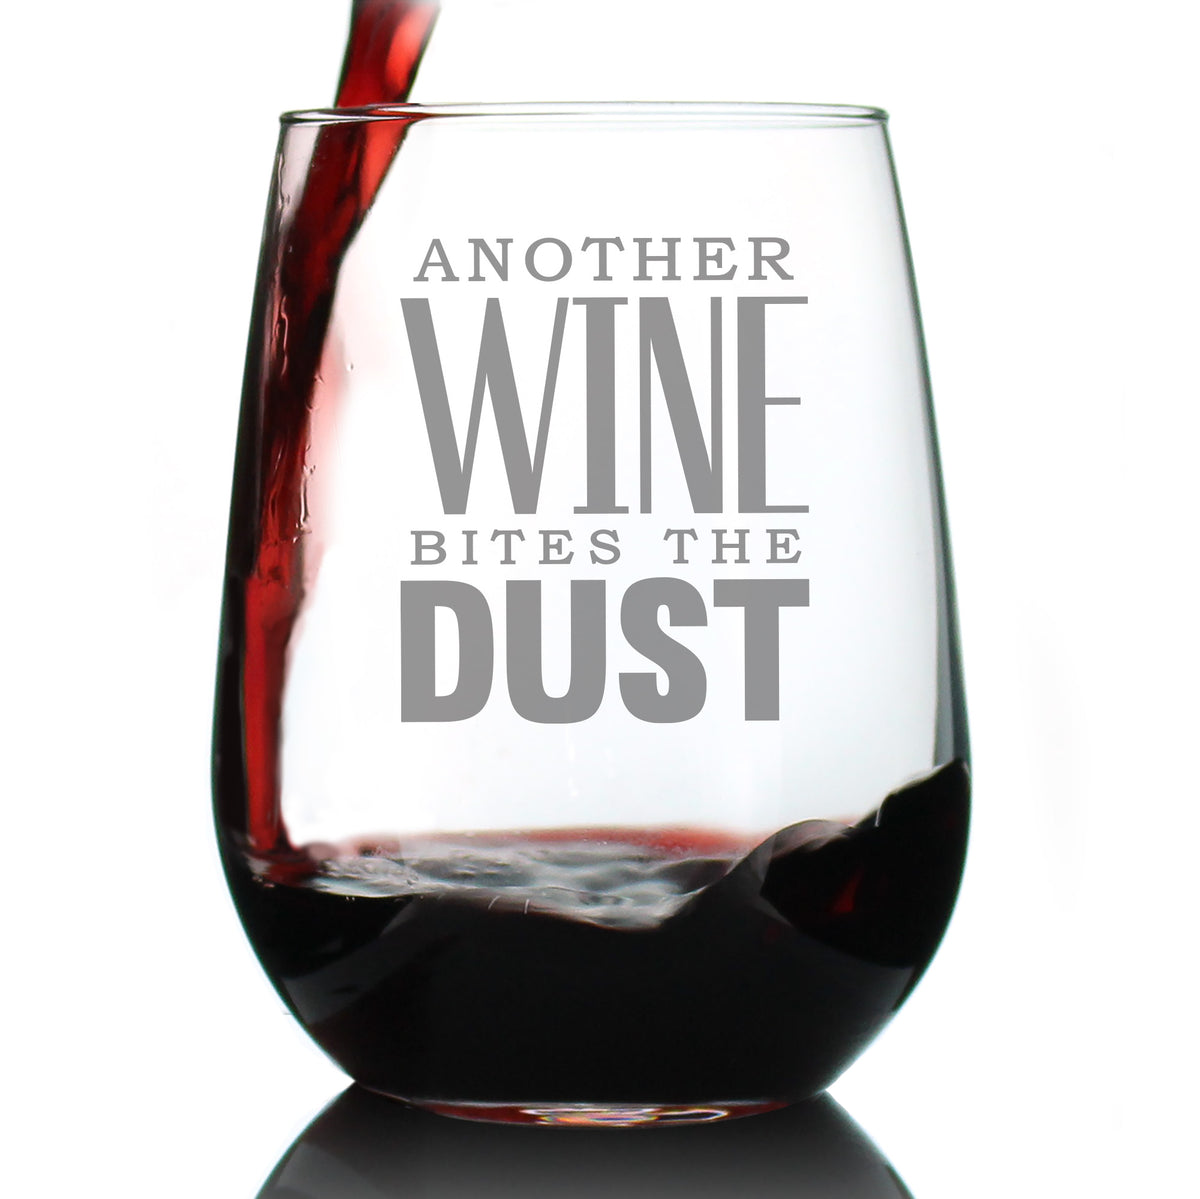 Bites the Dust – Cute Funny Stemless Wine Glass, Large Glasses, Etched Sayings, Gift Box